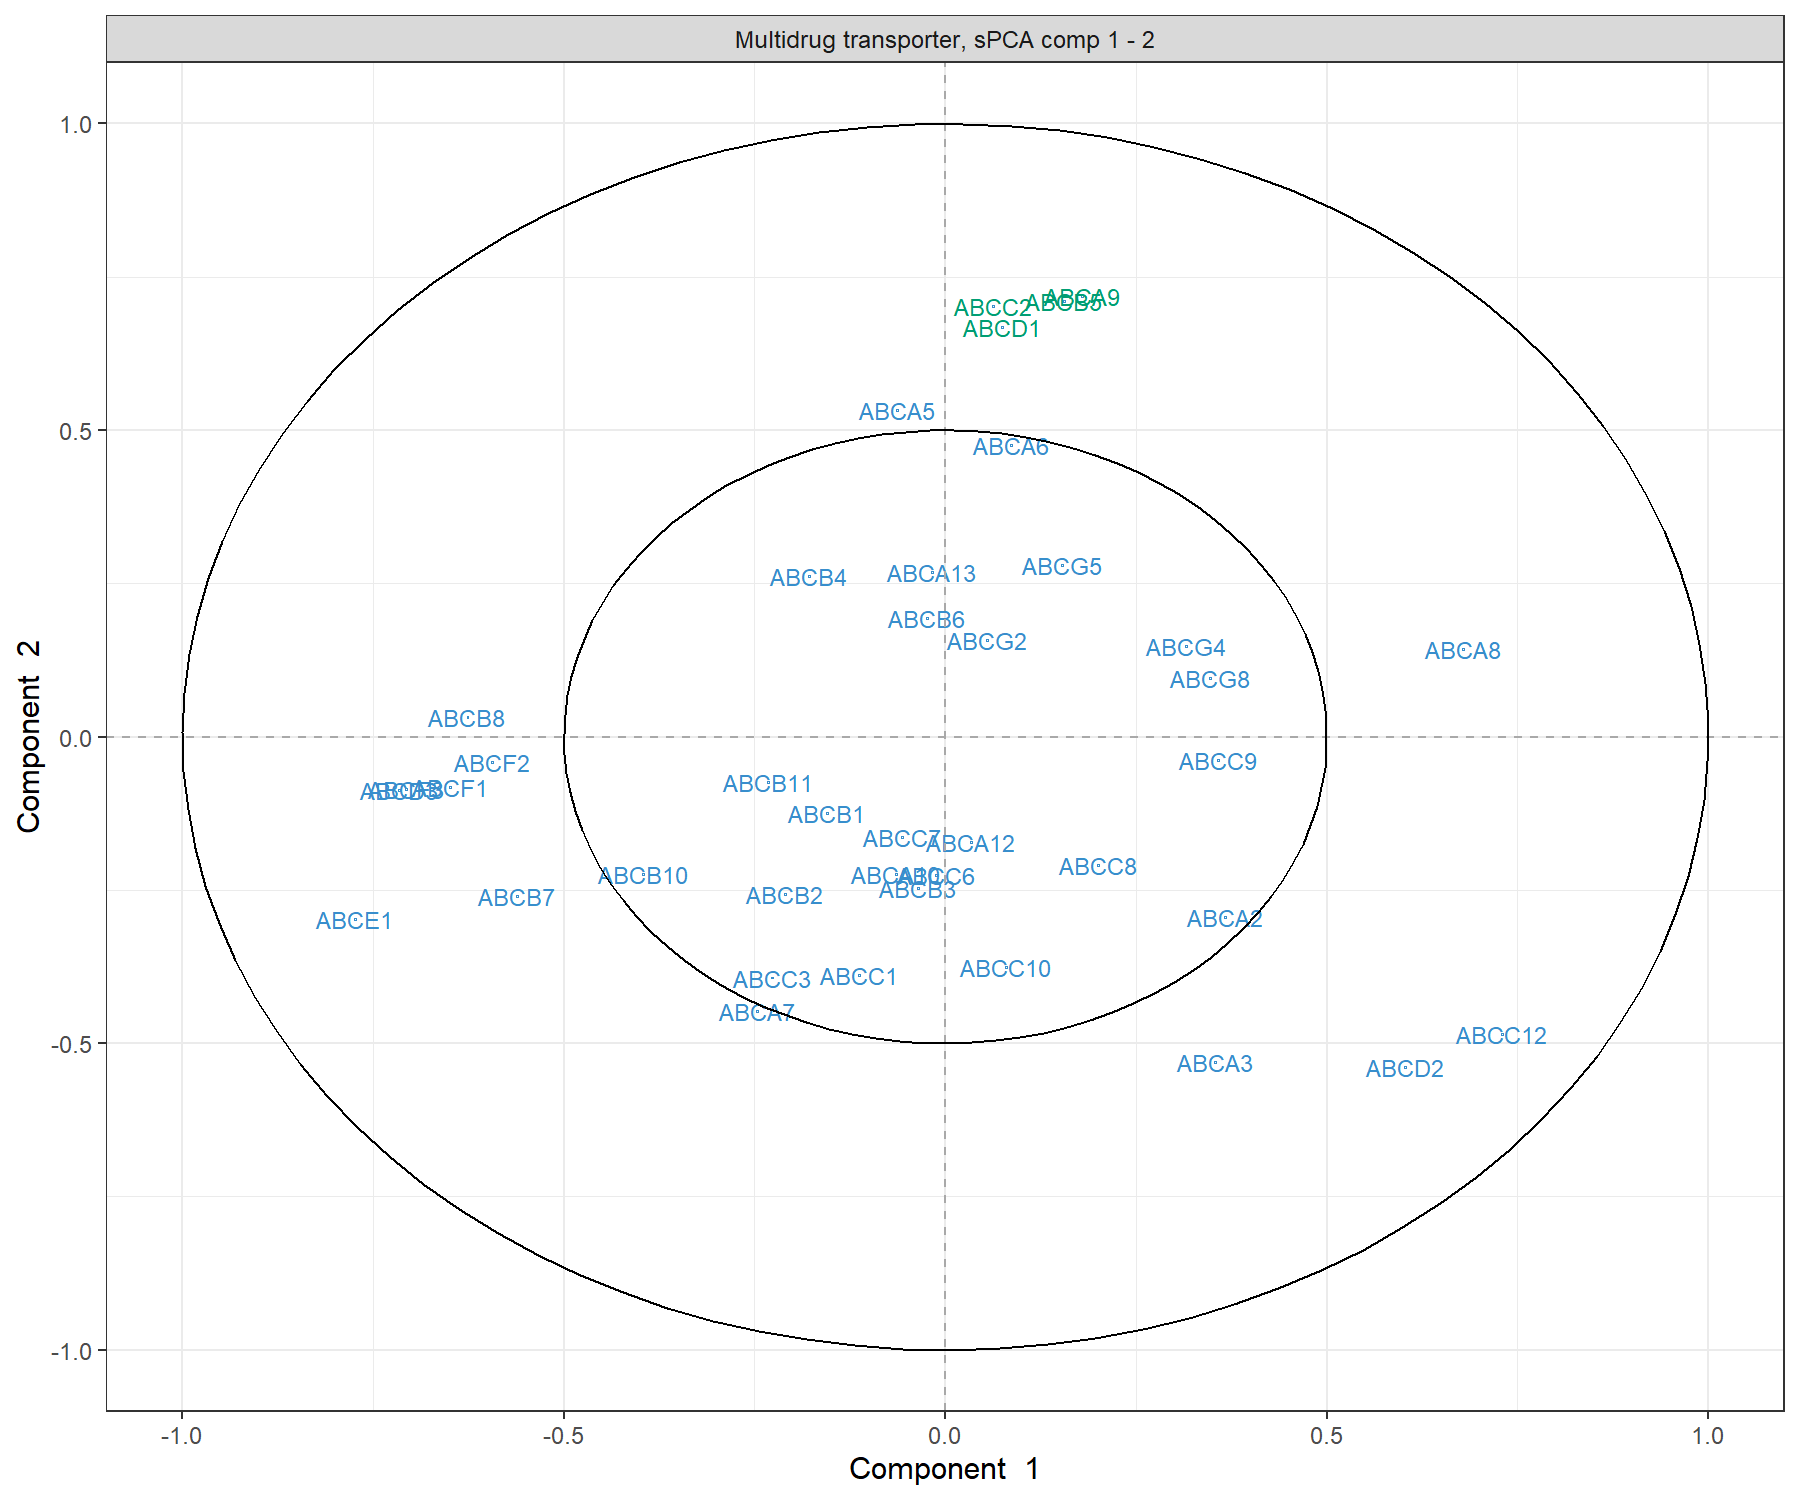 Correlation Circle plot from the sPCA performed on the ABC.trans data. Only the transporters selected by the sPCA are shown on this plot. Transporters coloured in green are discussed in the text.